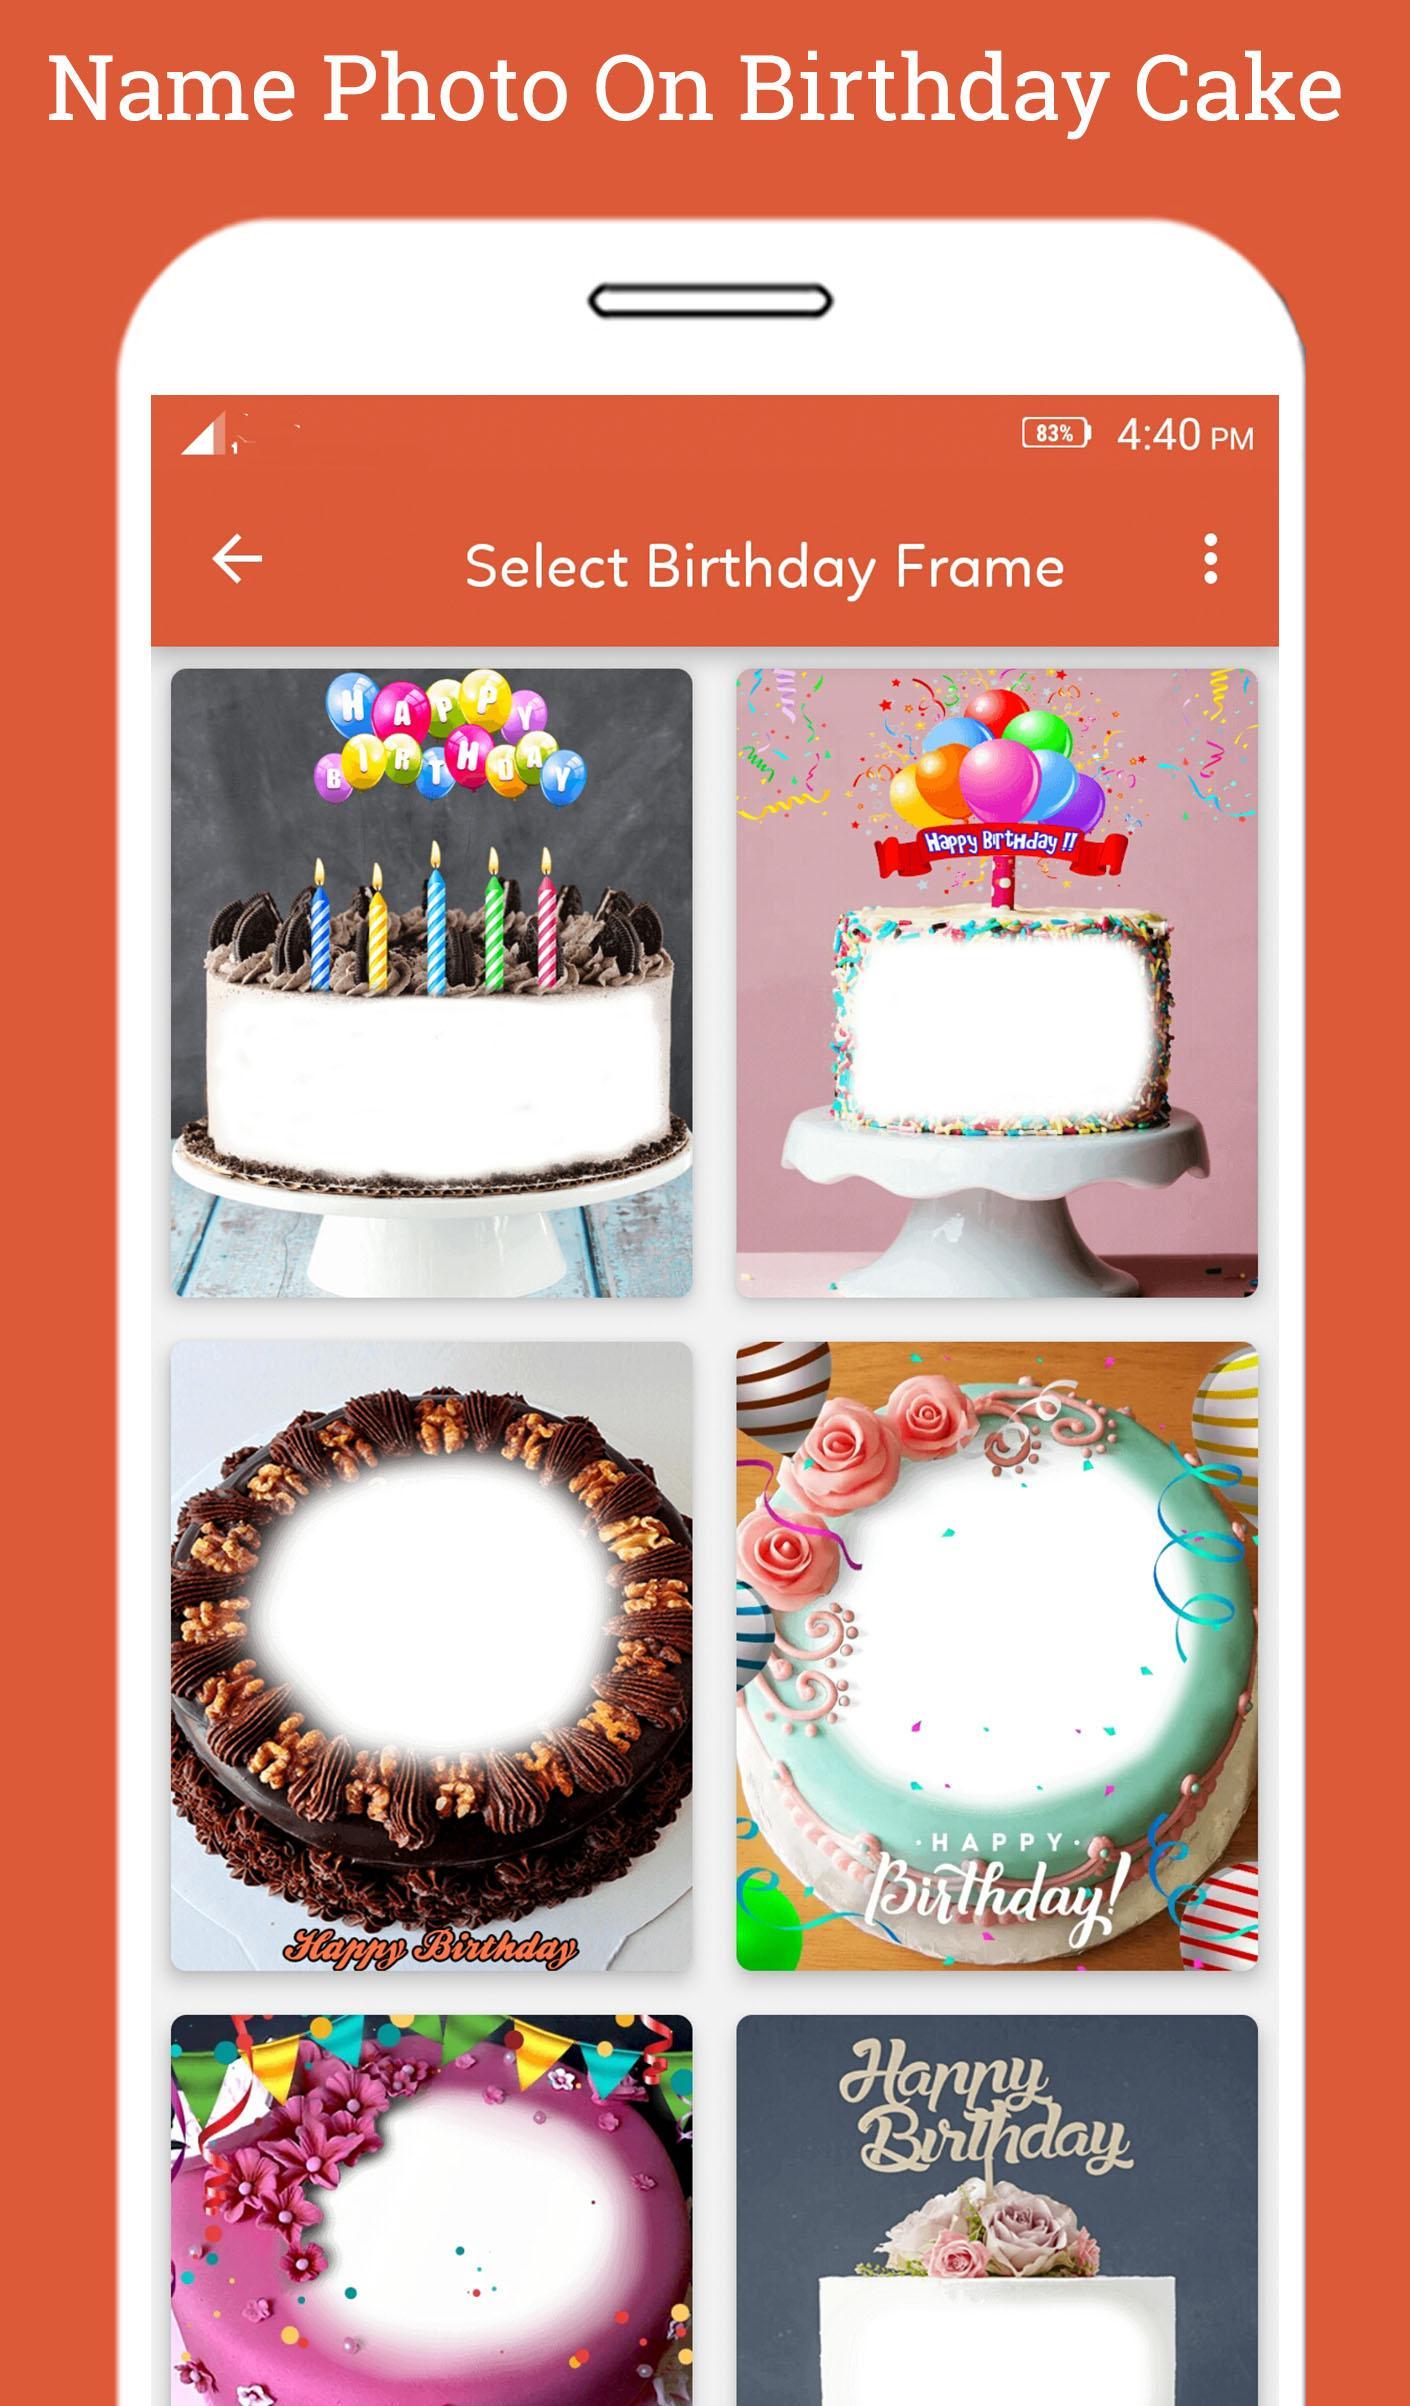 Name Photo On Birthday Cake For Android Apk Download